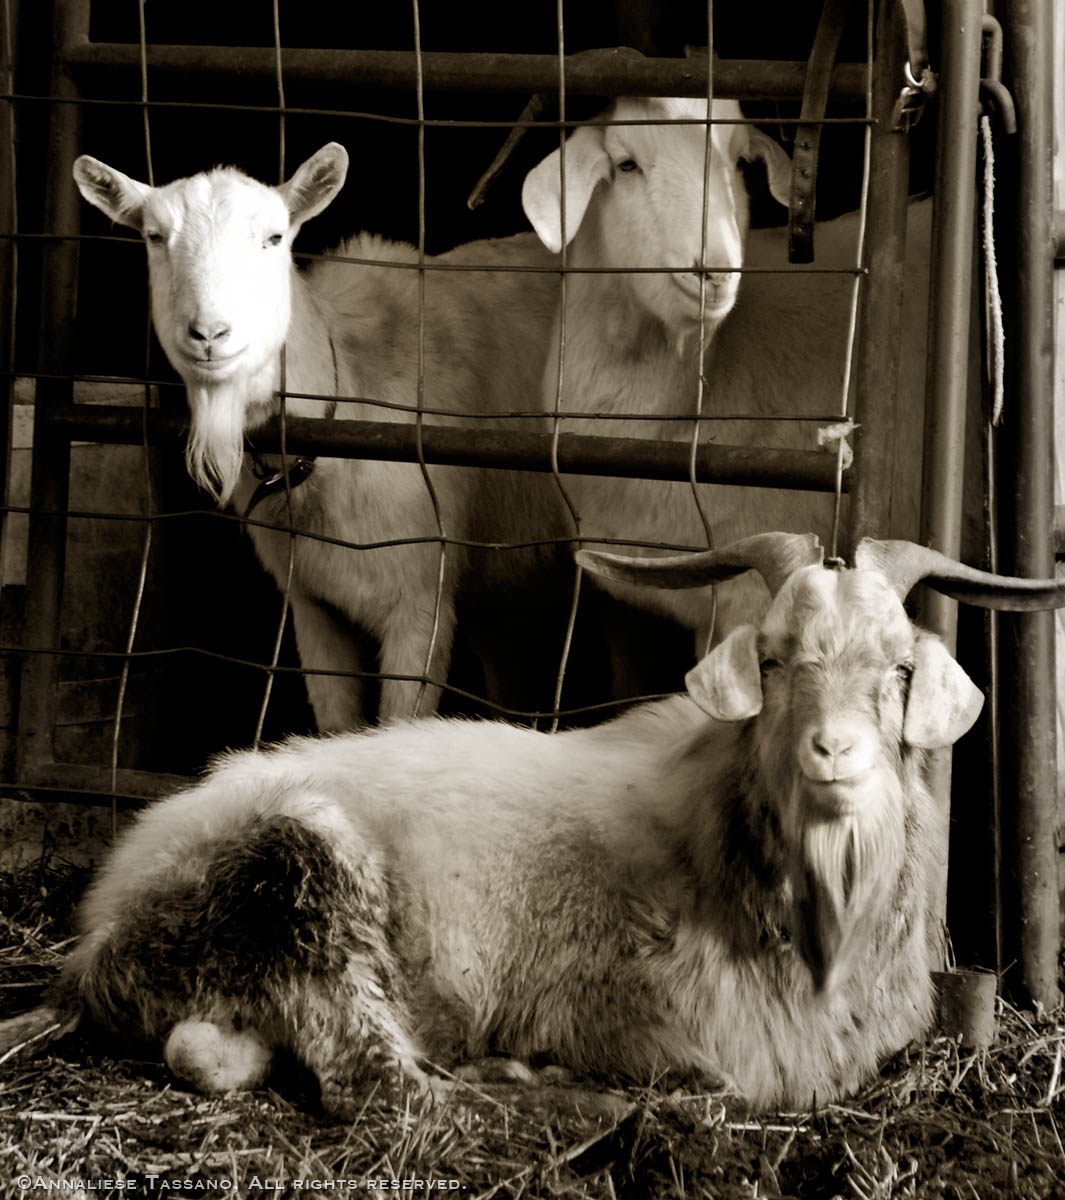 Three goats, two white Swiss Saanen dairy goats and one South African Boer goat with long curling horns.